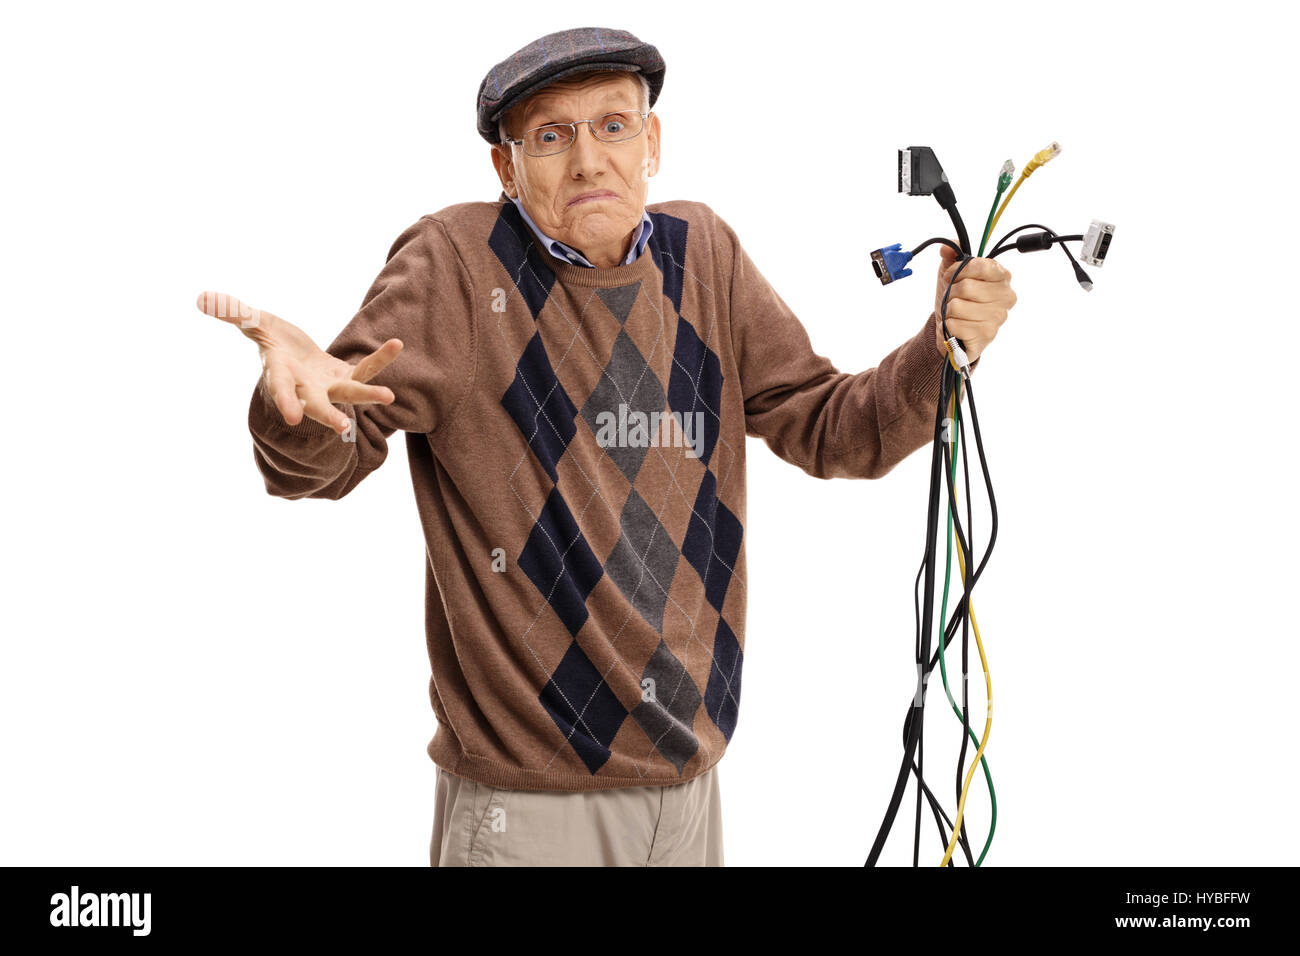 Baffled senior holding different types of electronic cables and looking at the camera isolated on white background Stock Photo